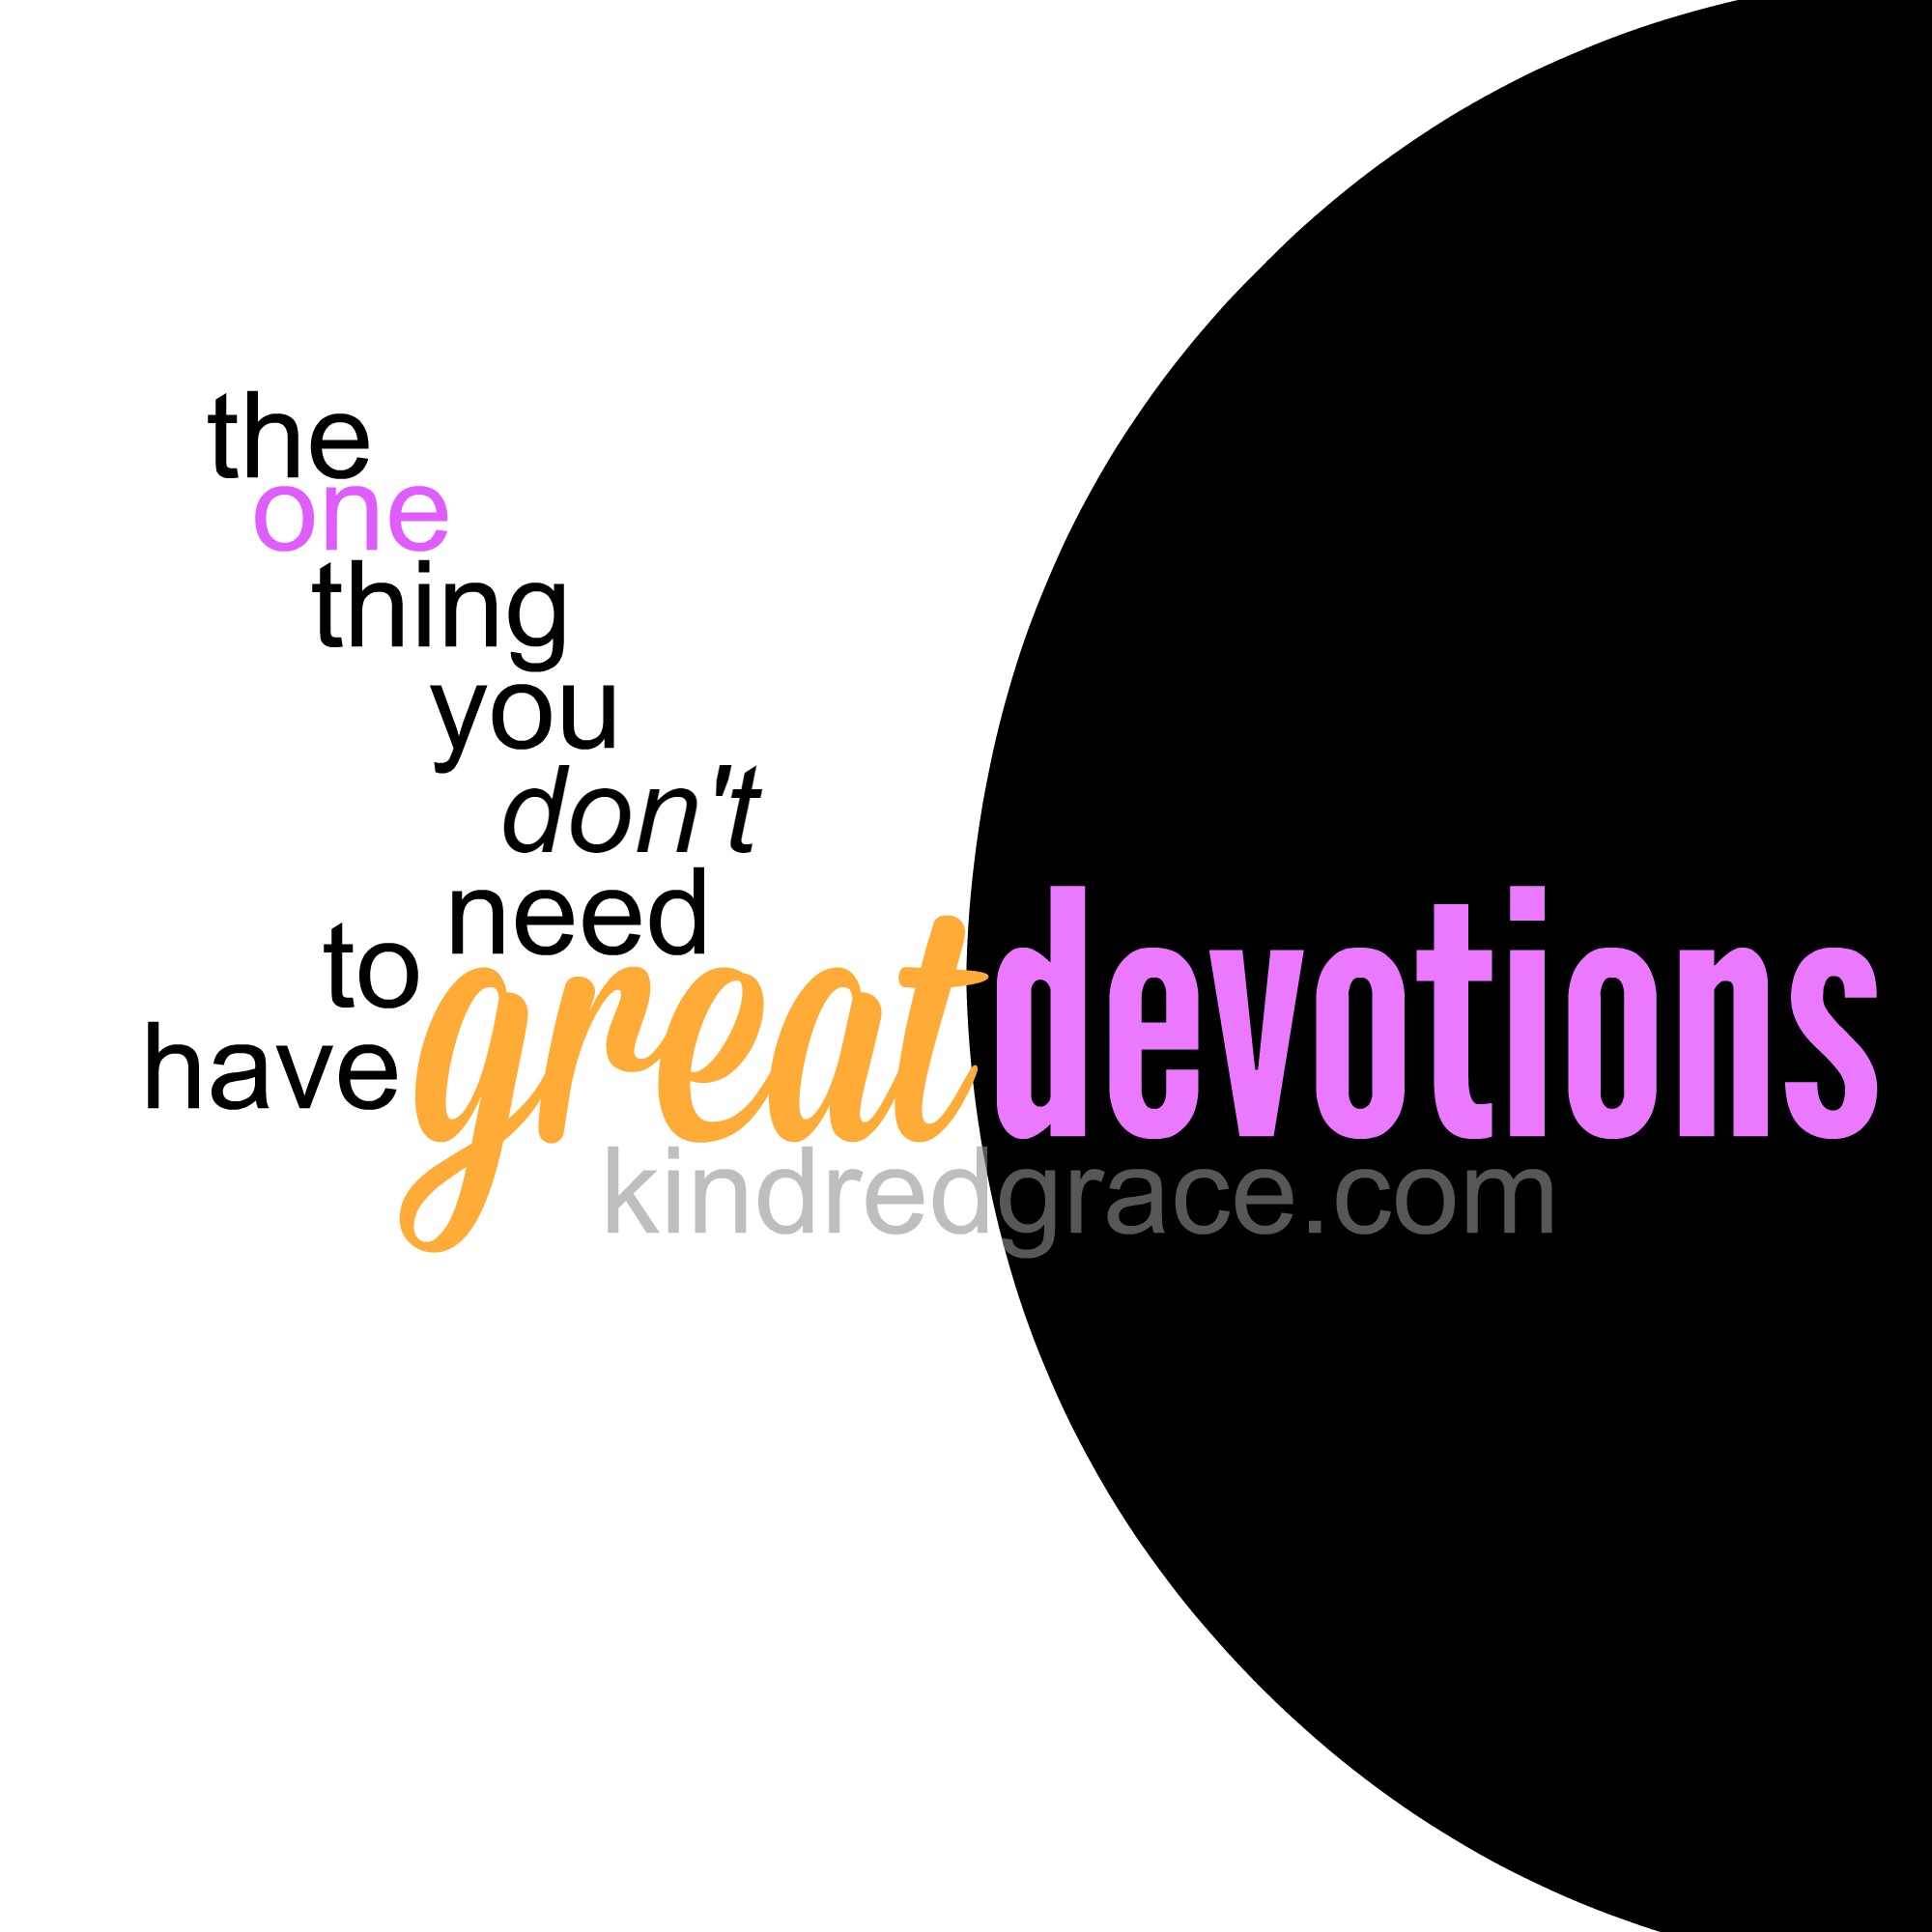 The One Thing You Don’t Need to Have Great Devotions